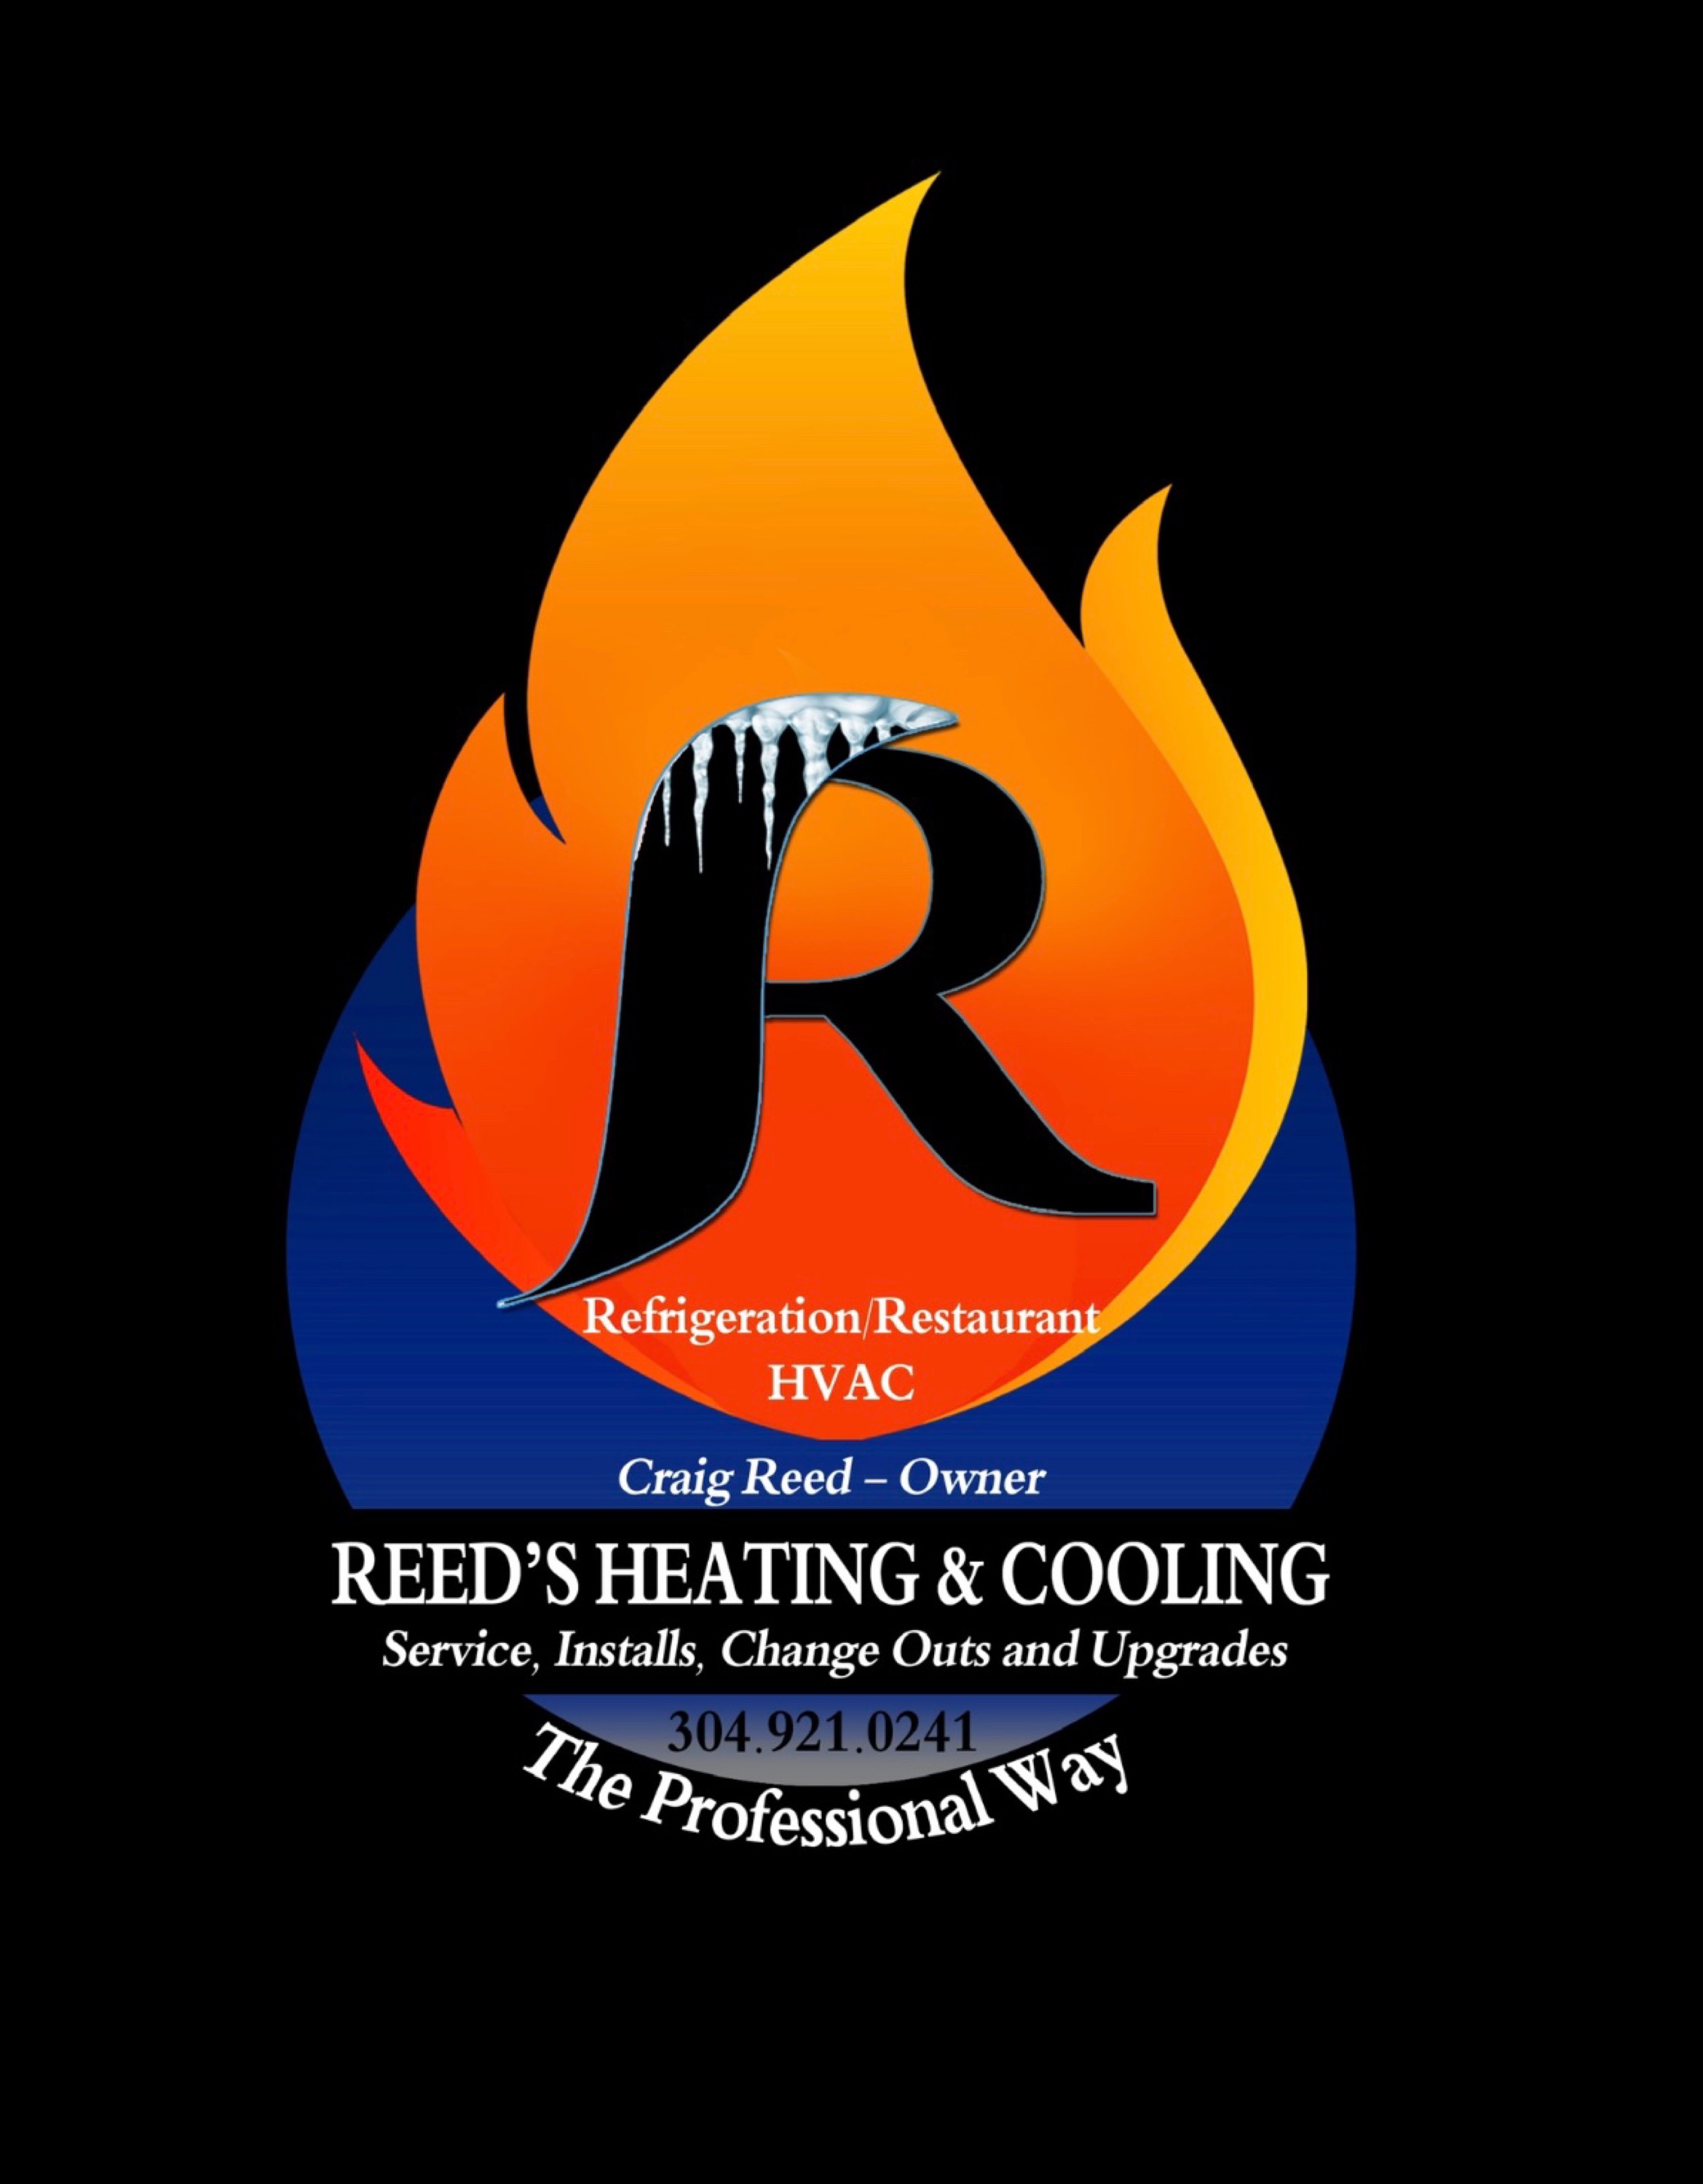 Reed's Heating and Cooling Logo